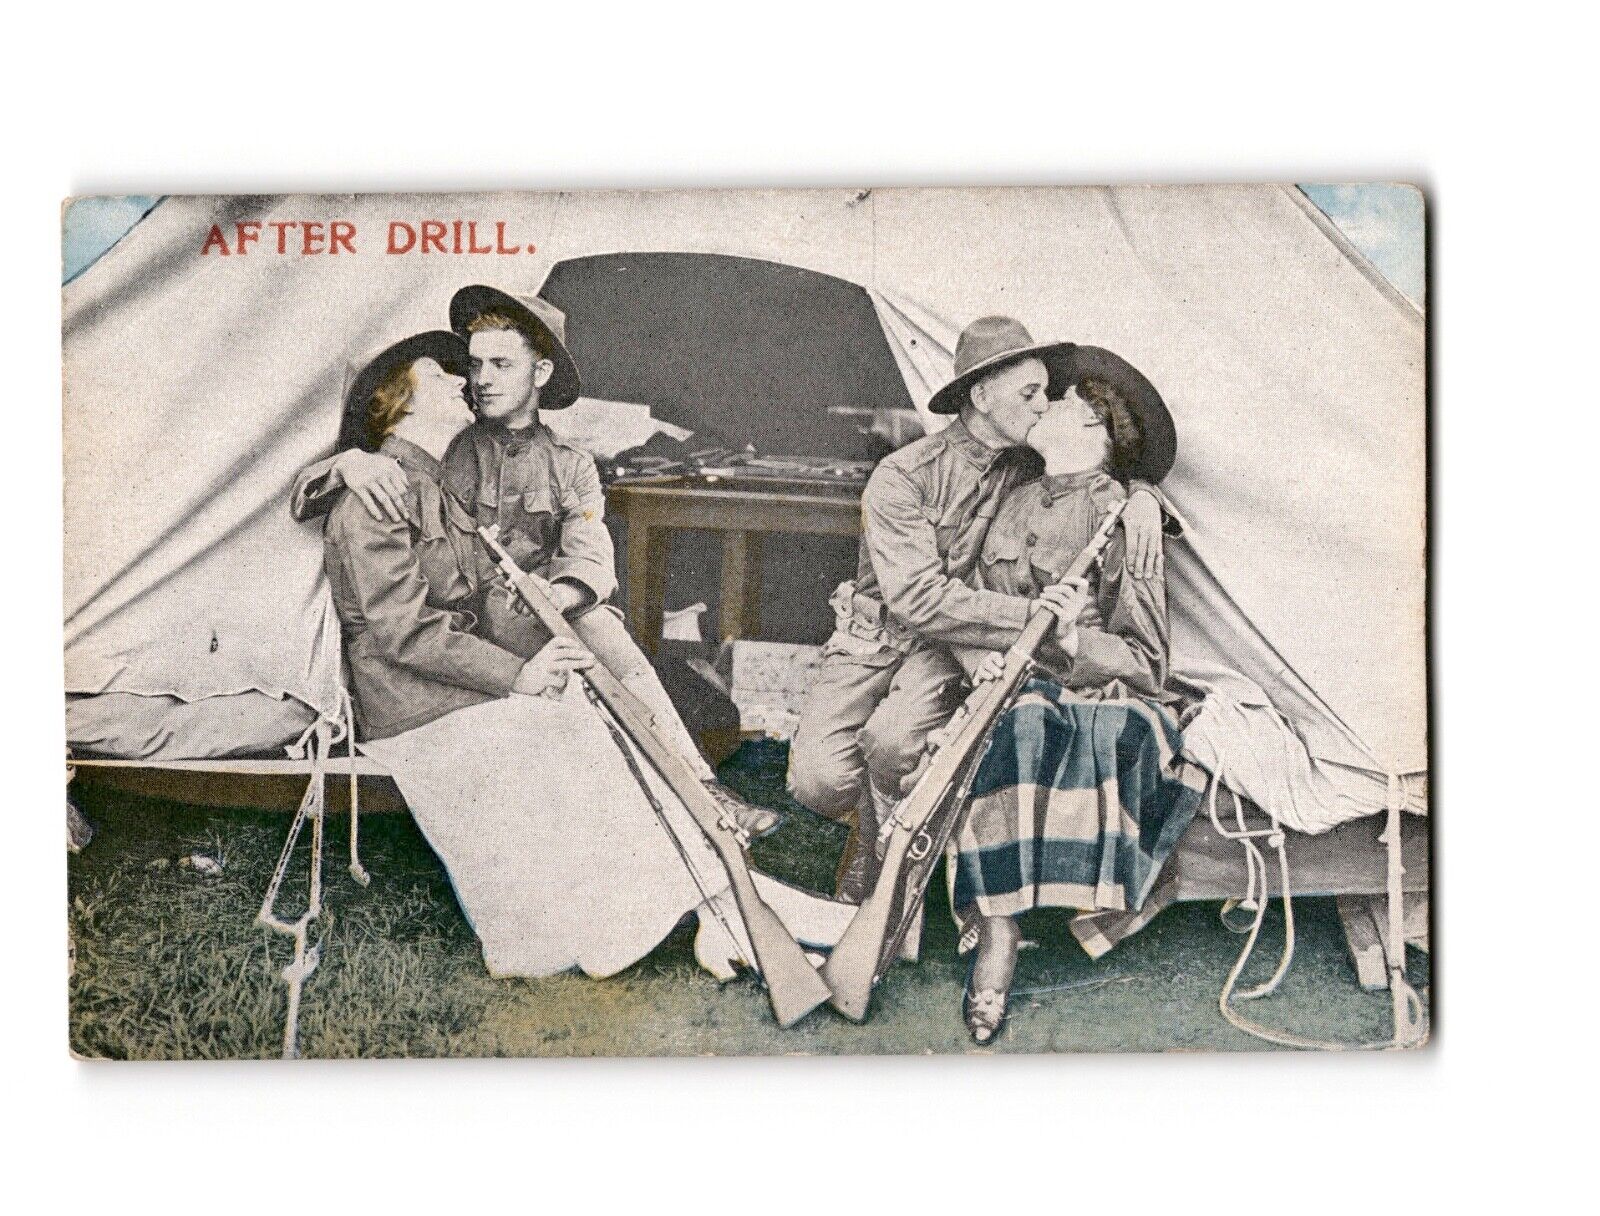 Antique Postcard 1910s After Drill Soldiers Lovers Tent Scene